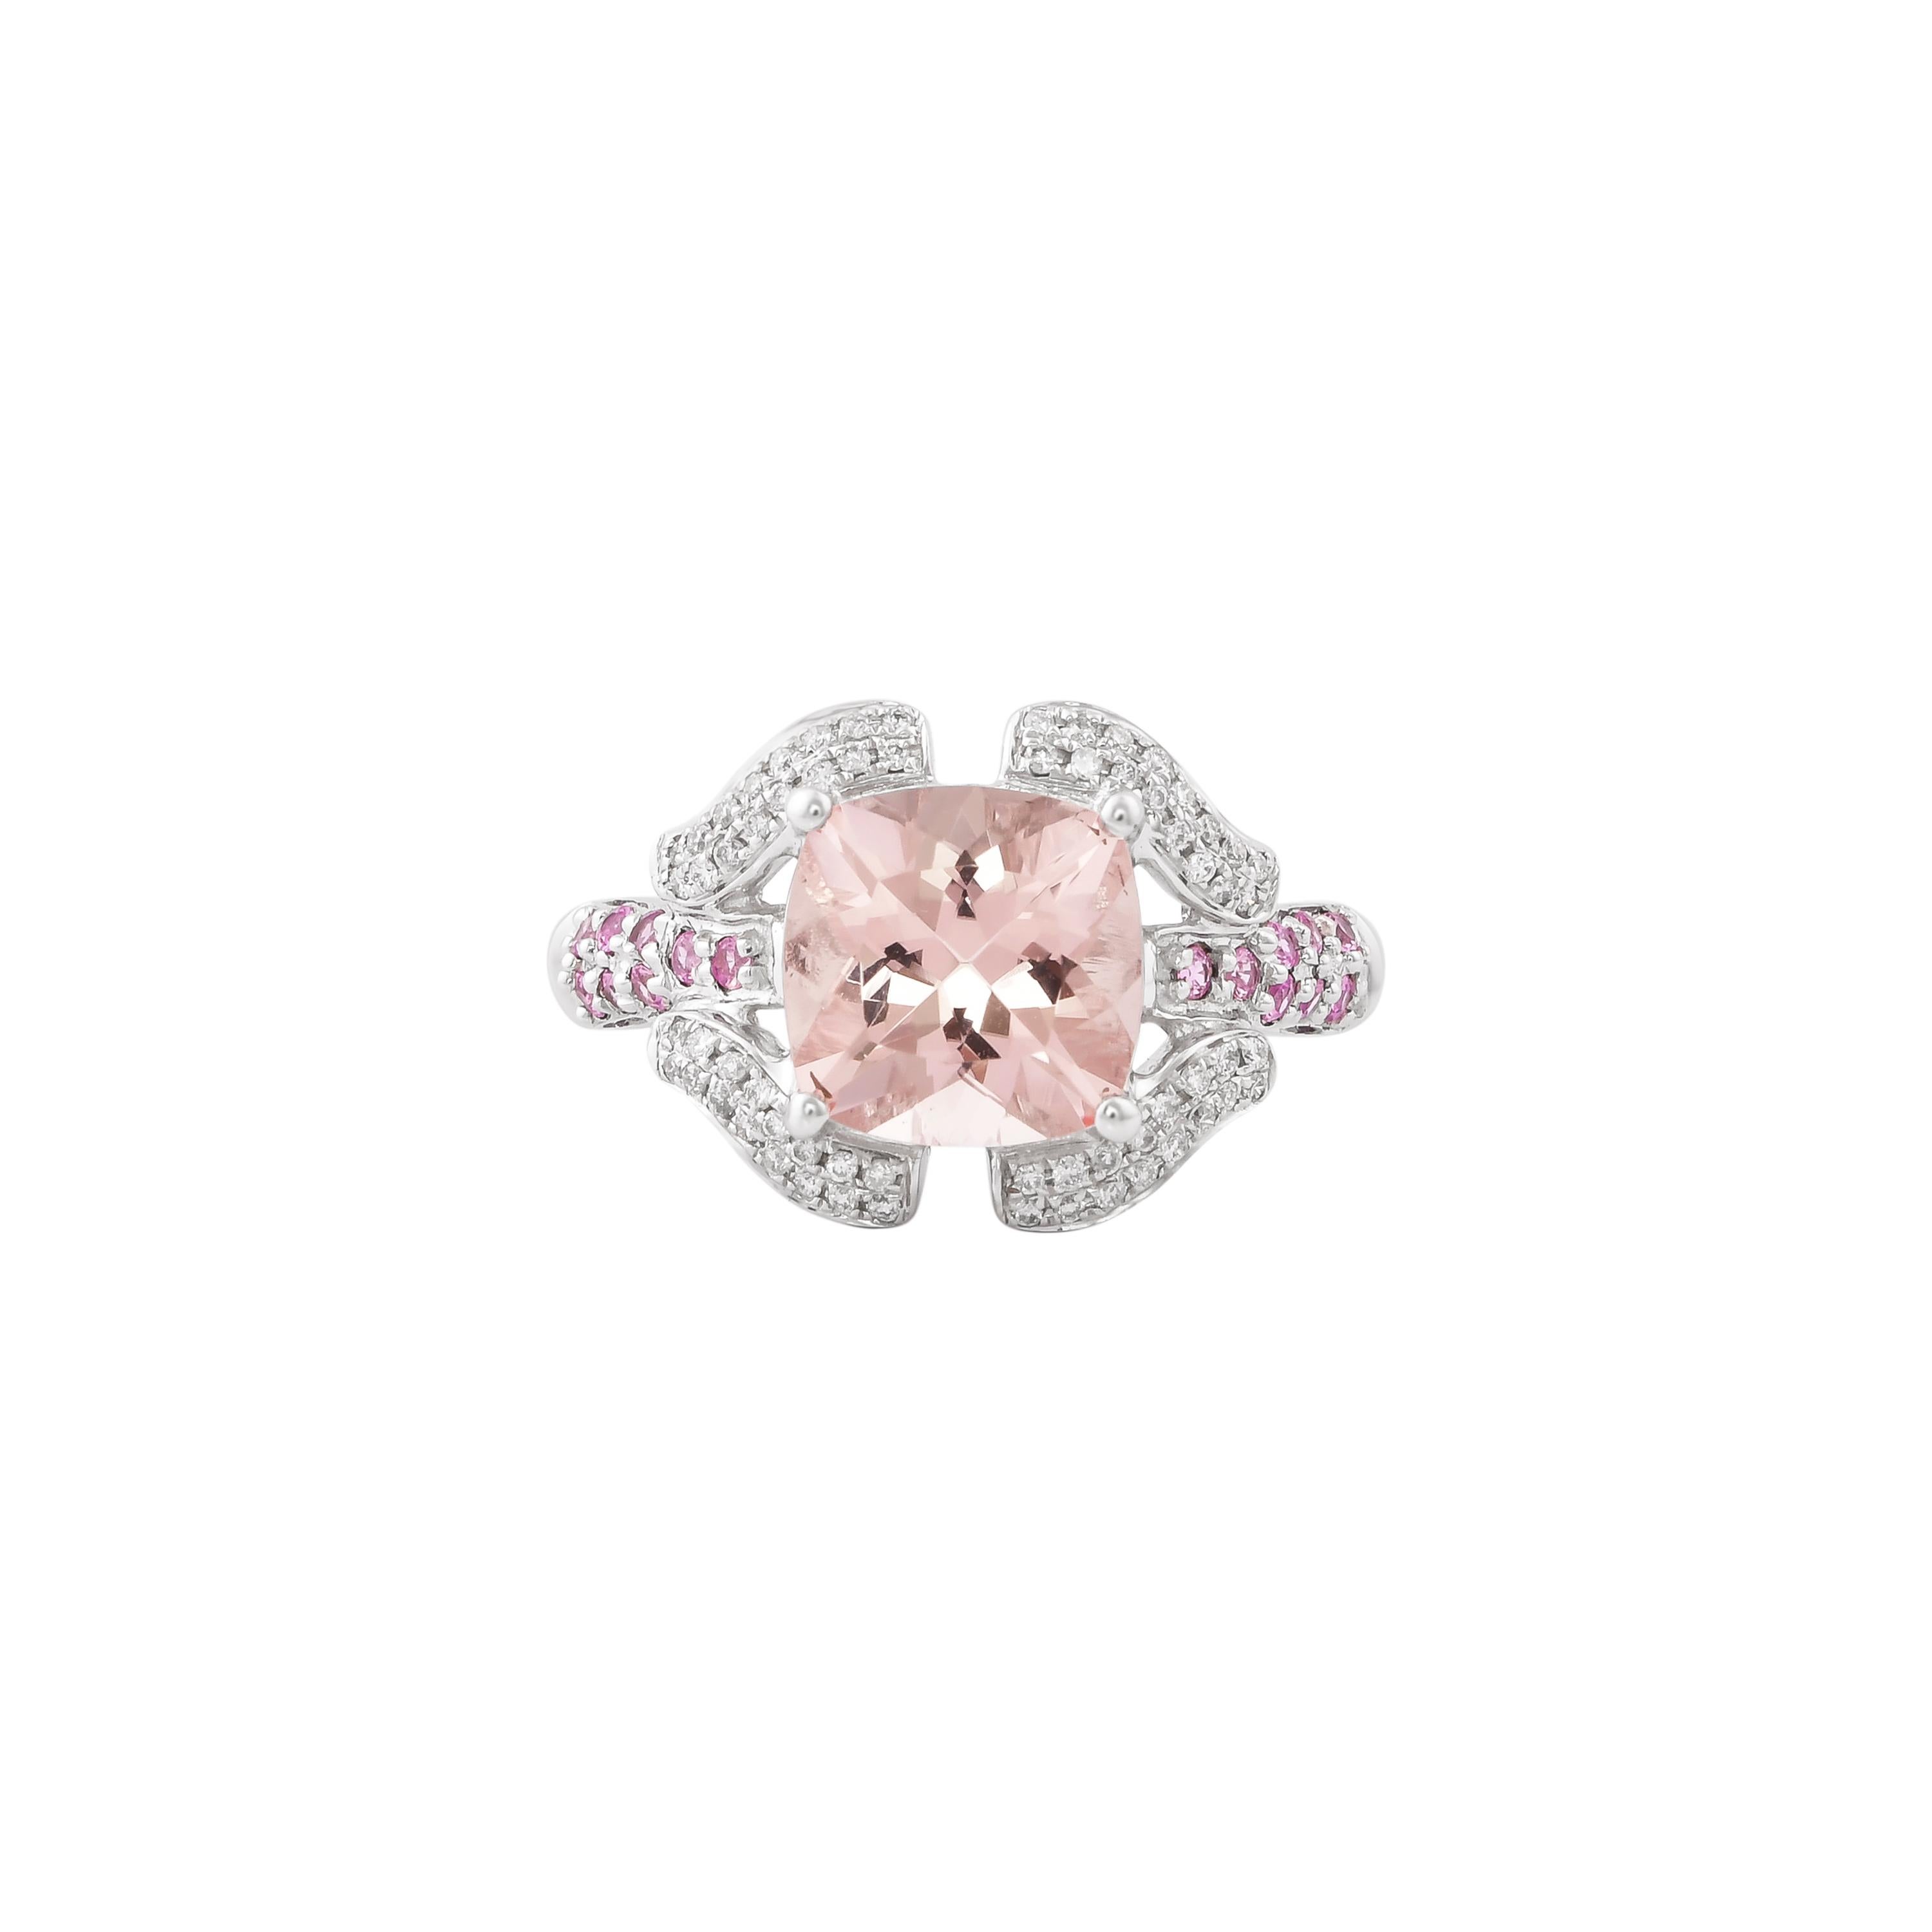 Contemporary 3.08 Carat Morganite, Pink Tourmaline and Diamond Ring in 14 Karat White Gold For Sale